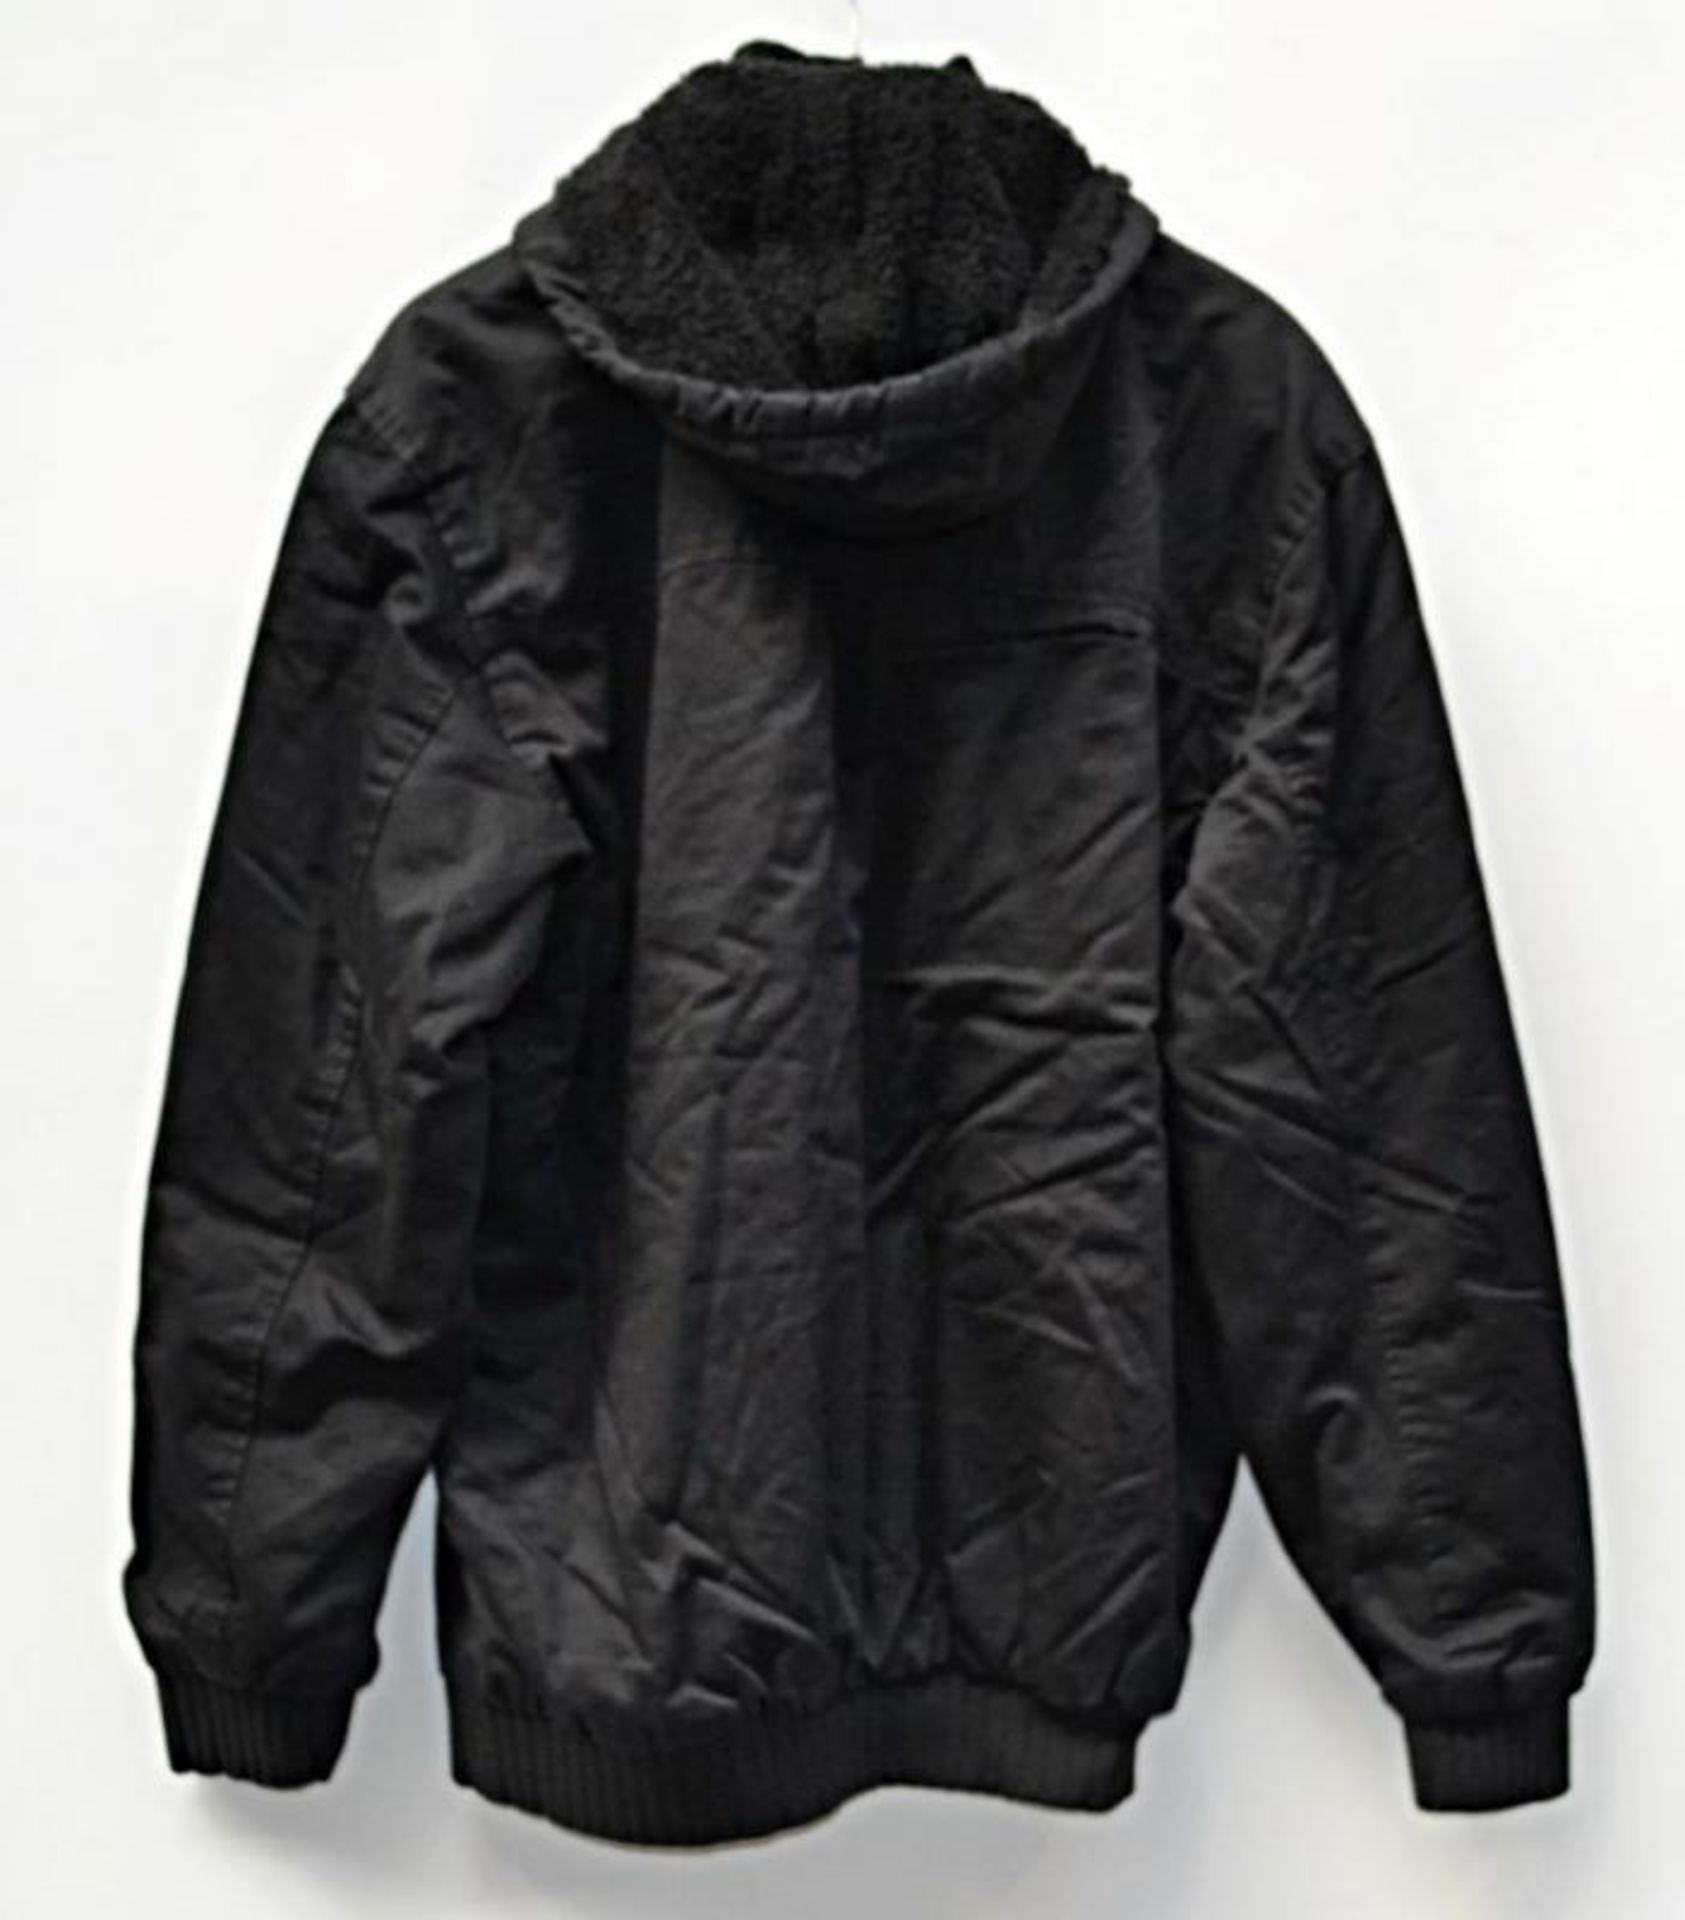 1 x Mens Zip-Up Cotton Jacket With Plush Lining And Removable Hood - New With Tags - Recent Store Cl - Image 3 of 8